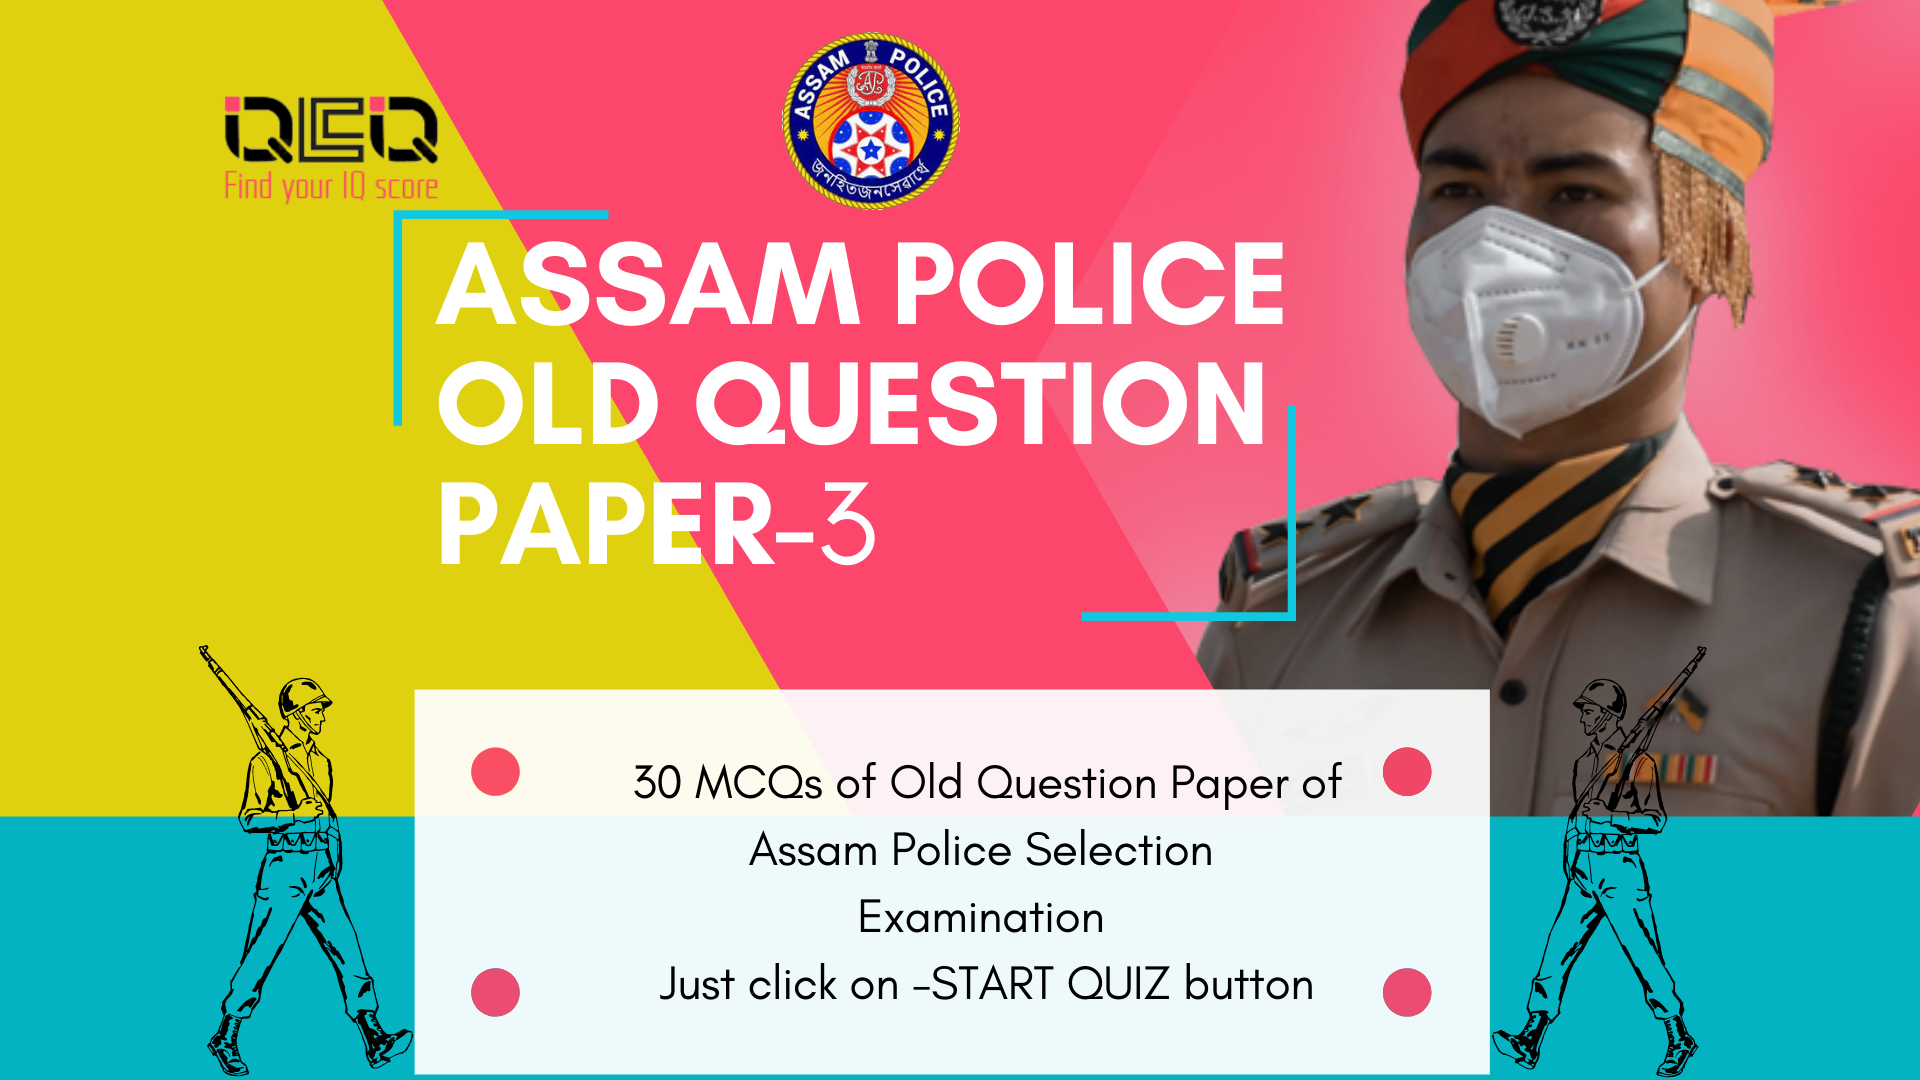 Assam Police Old Question Paper-1﻿ Separator ﻿ Old question paper of 2020 Assam police-part-3